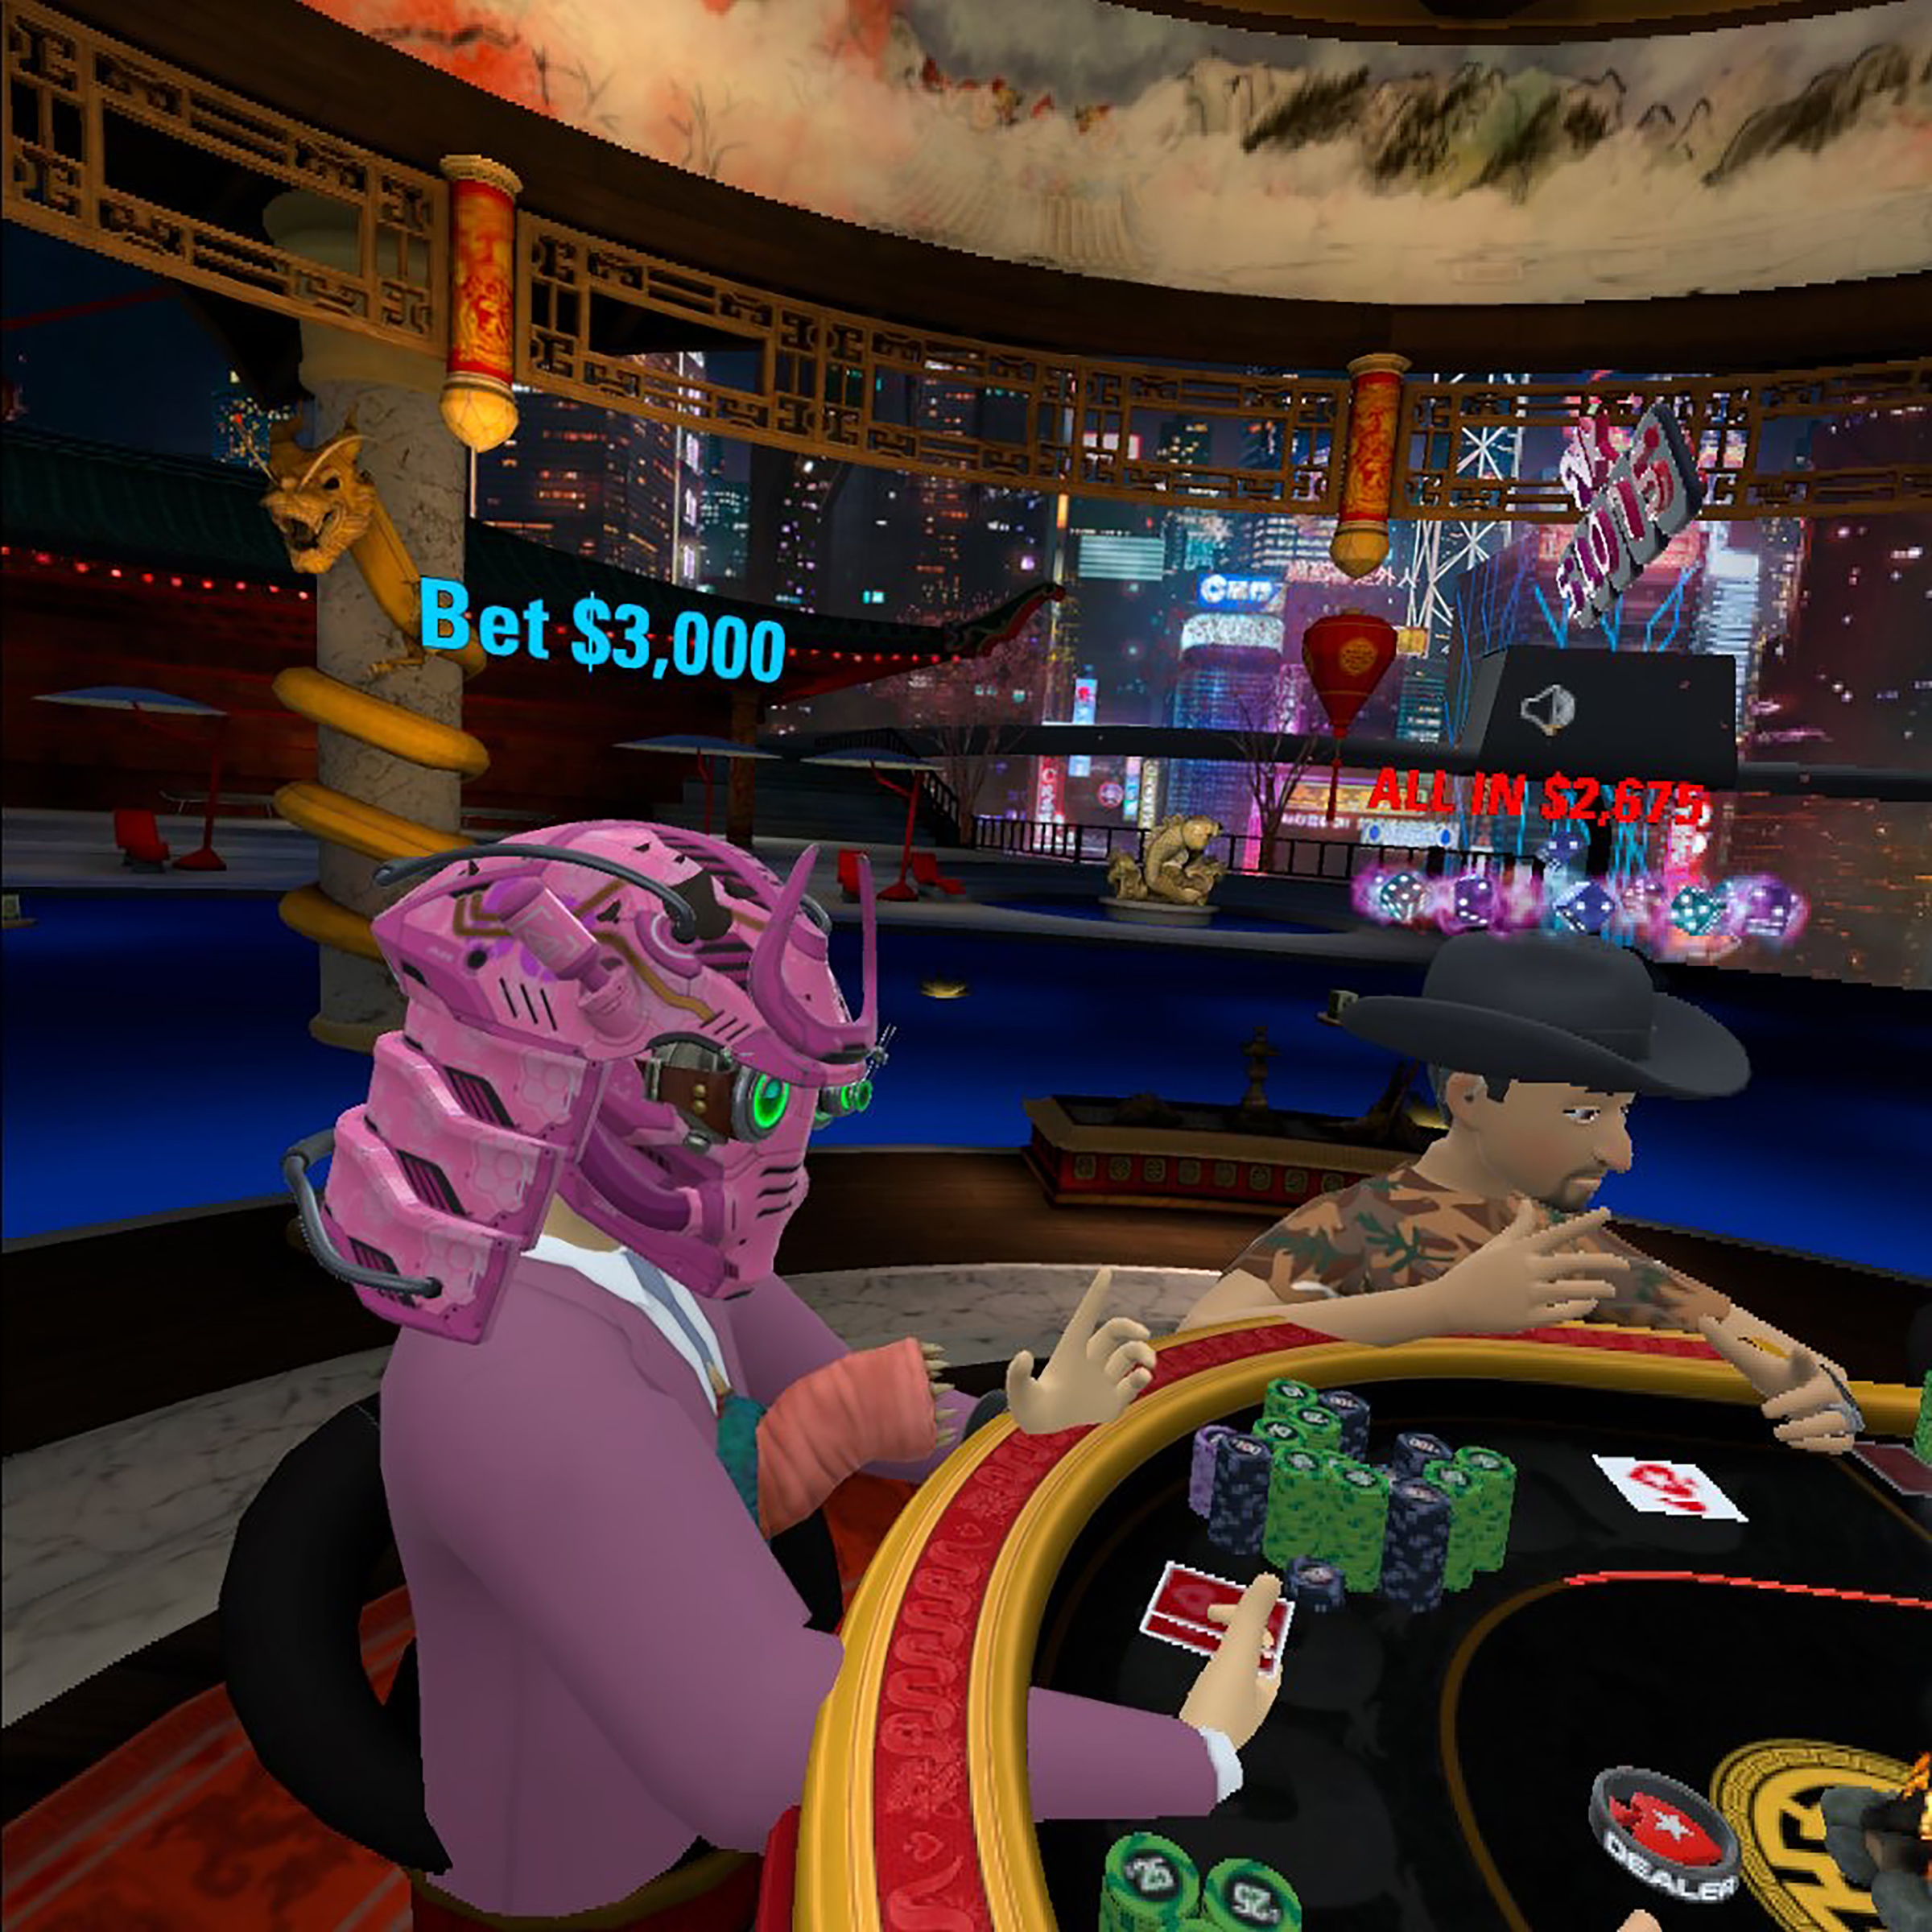 The author’s view from a poker table in the metaverse (Andrew Chow)